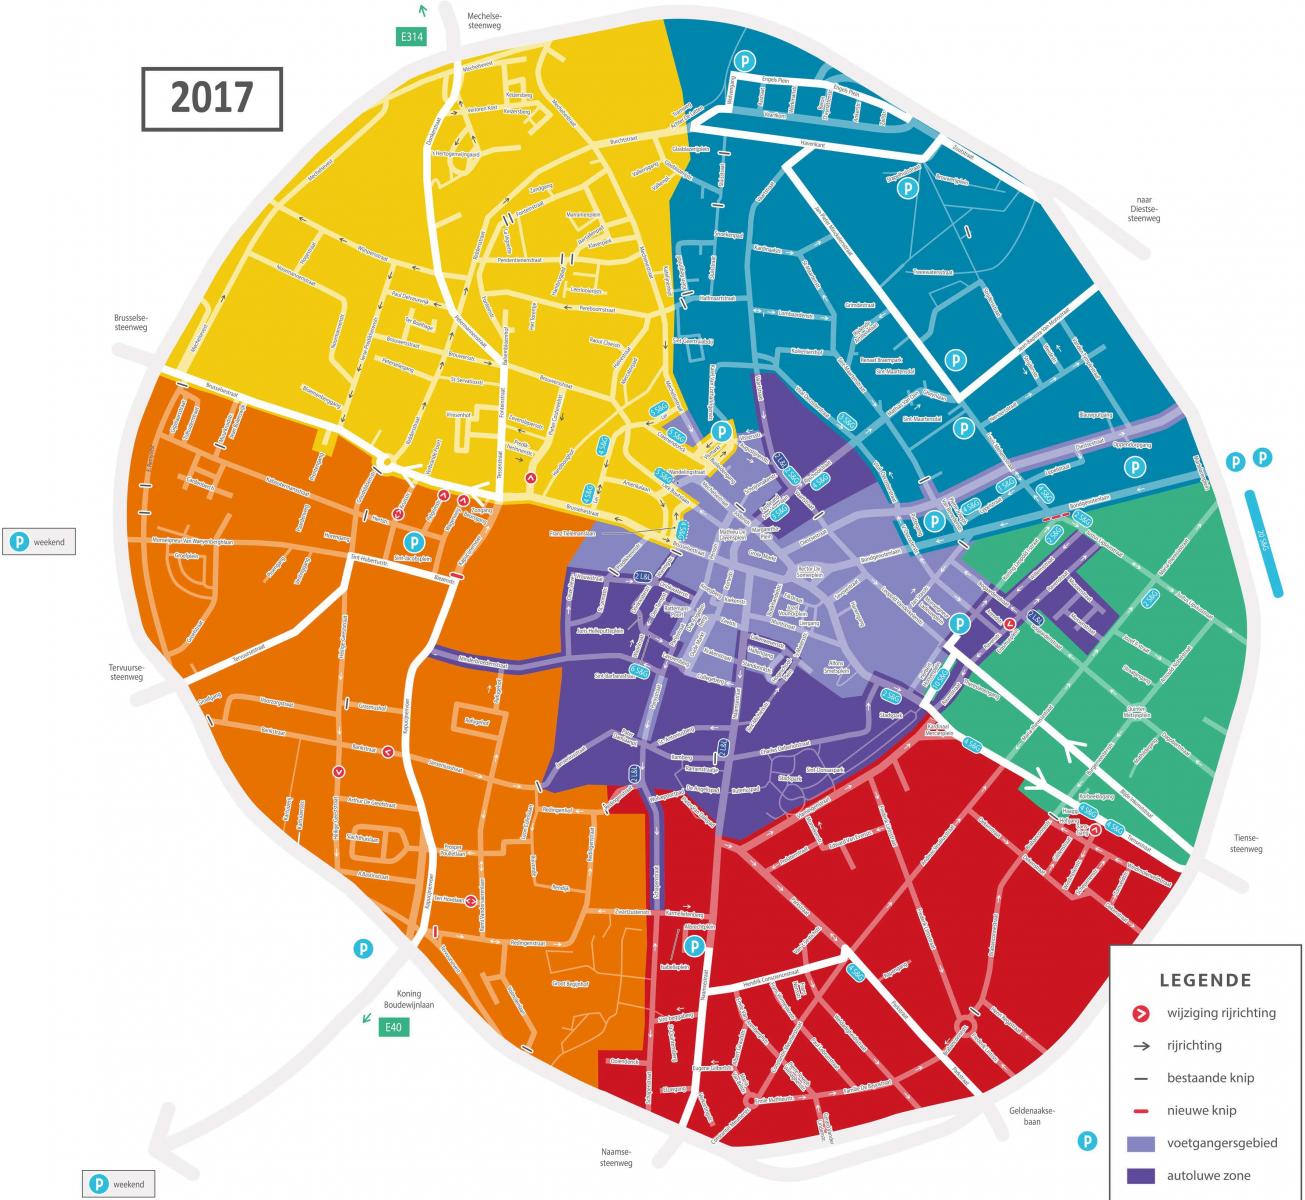 Centre of Leuven divided into pedestrian zone (purple) and 5 sectors (blue, green, red, orange, yellow). In order to travel between sectors by car, you need to use the ring road.